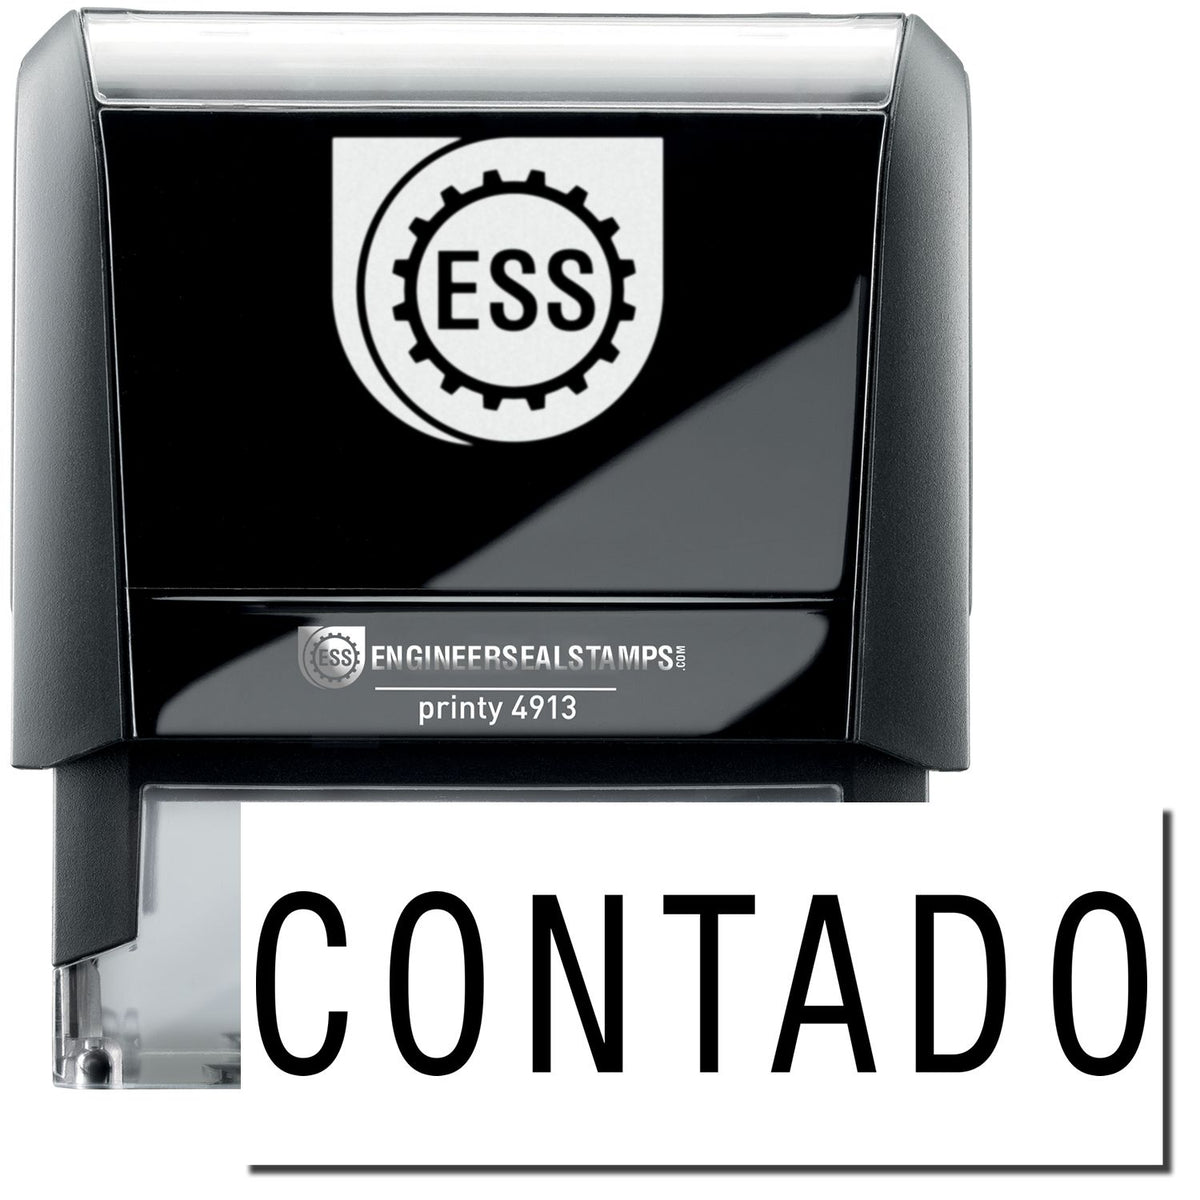 A self-inking stamp with a stamped image showing how the text &quot;CONTADO&quot; in a large font is displayed by it after stamping.